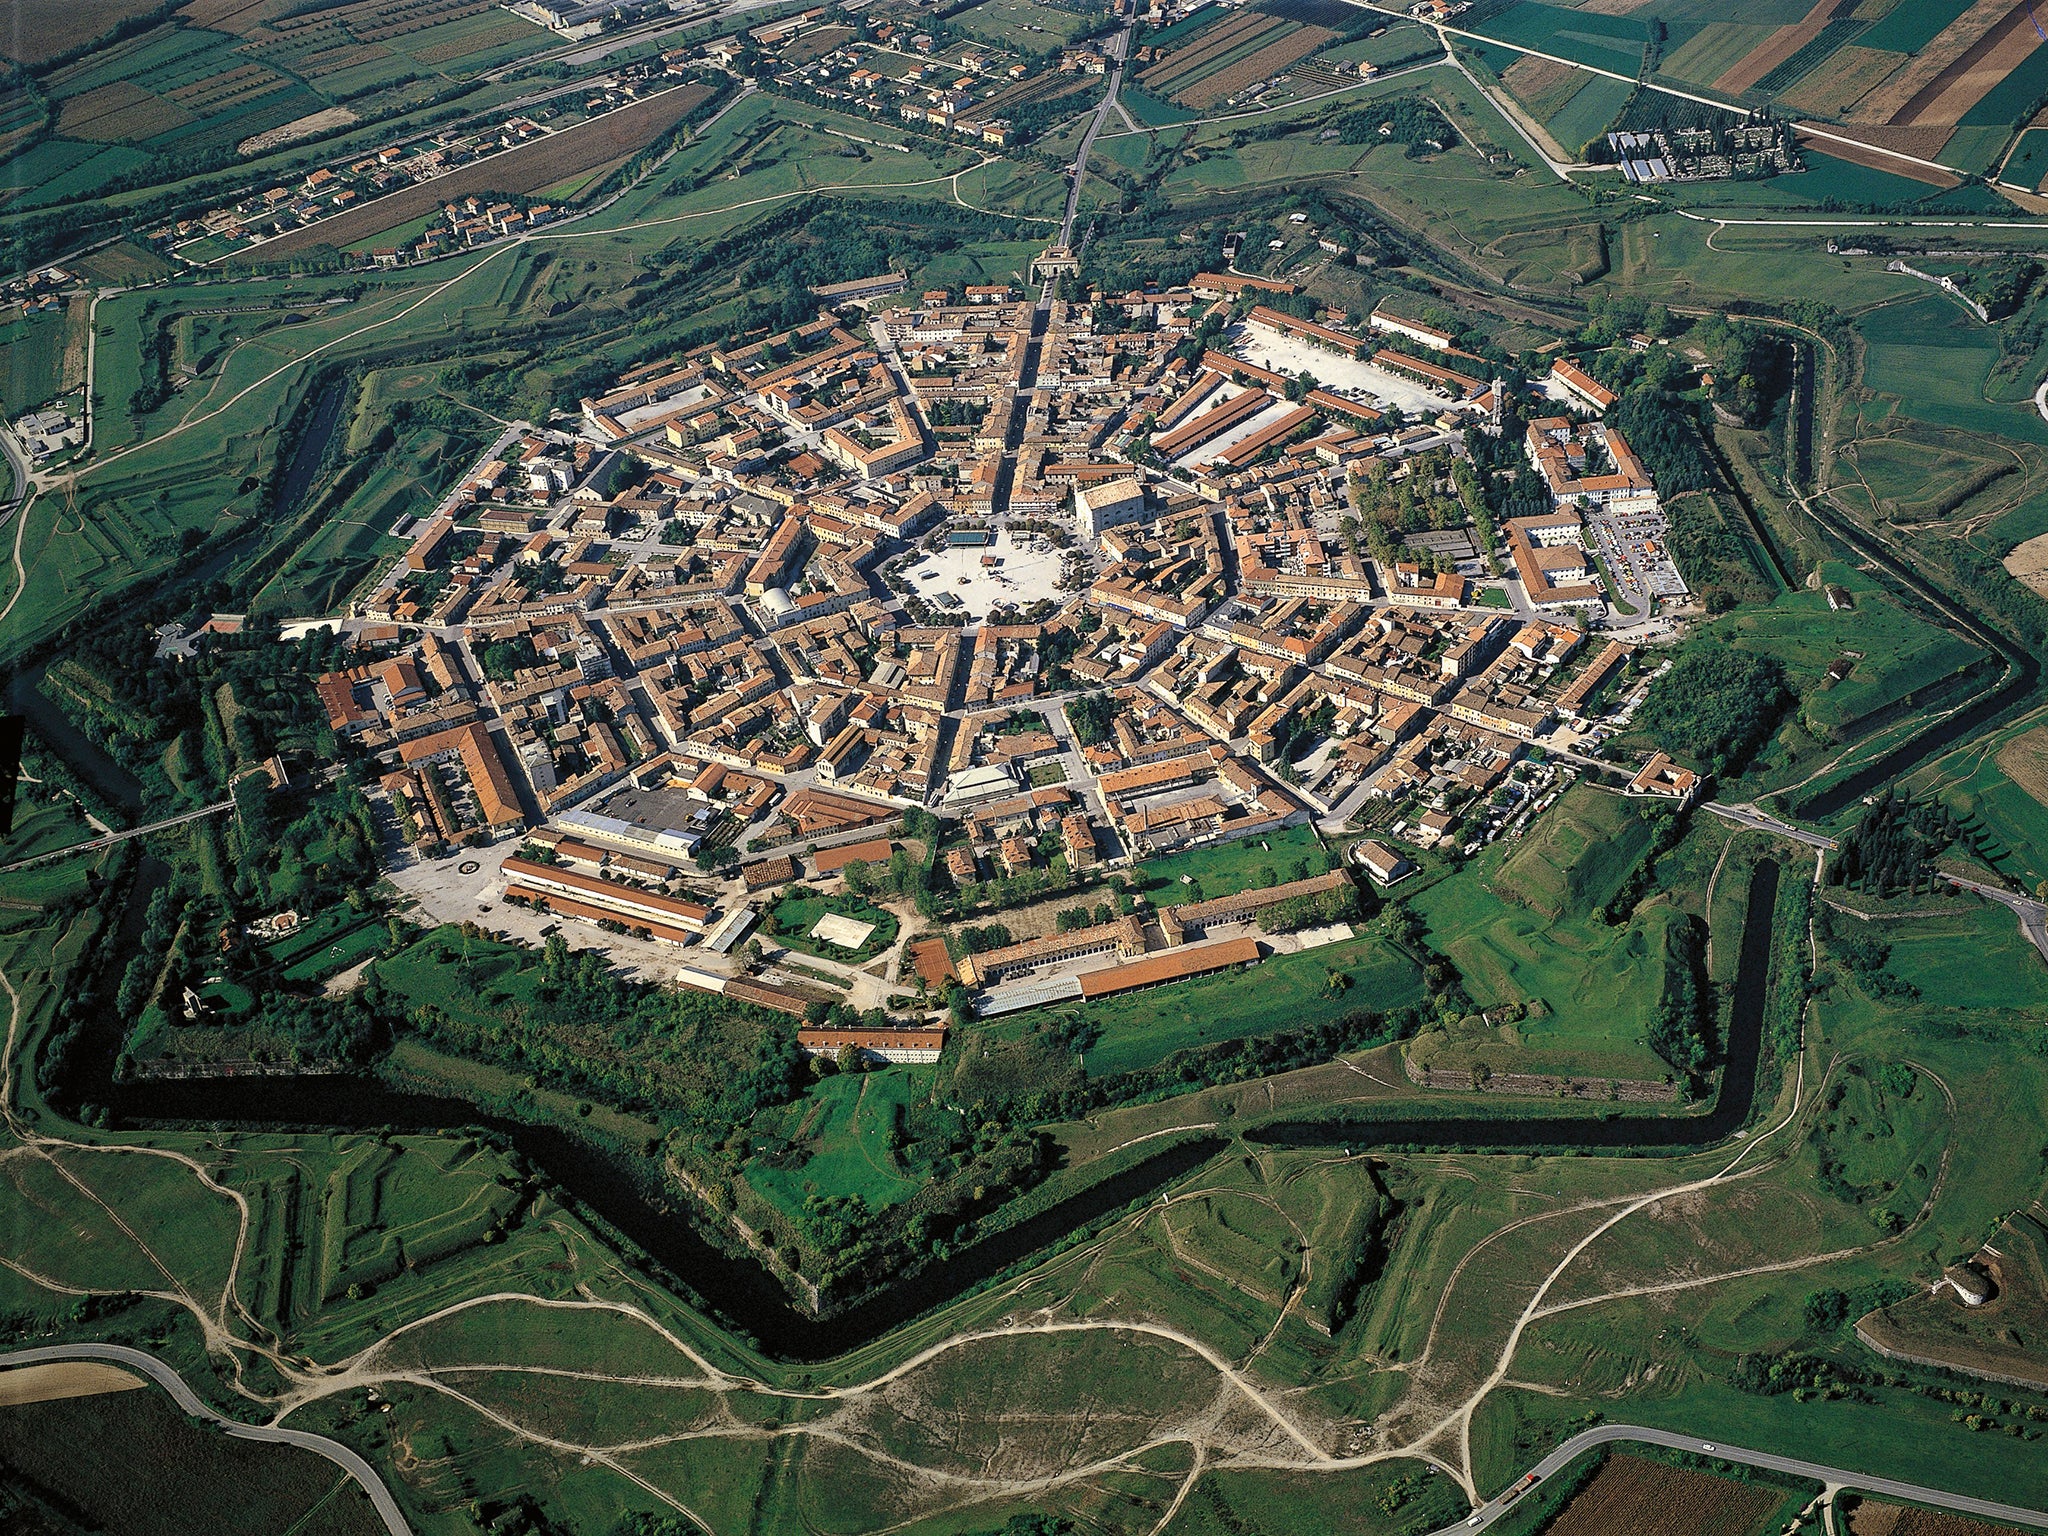 The Italian city of Palmanova was founded as an idealistic citadel in 1593 – but nobody wanted to live there